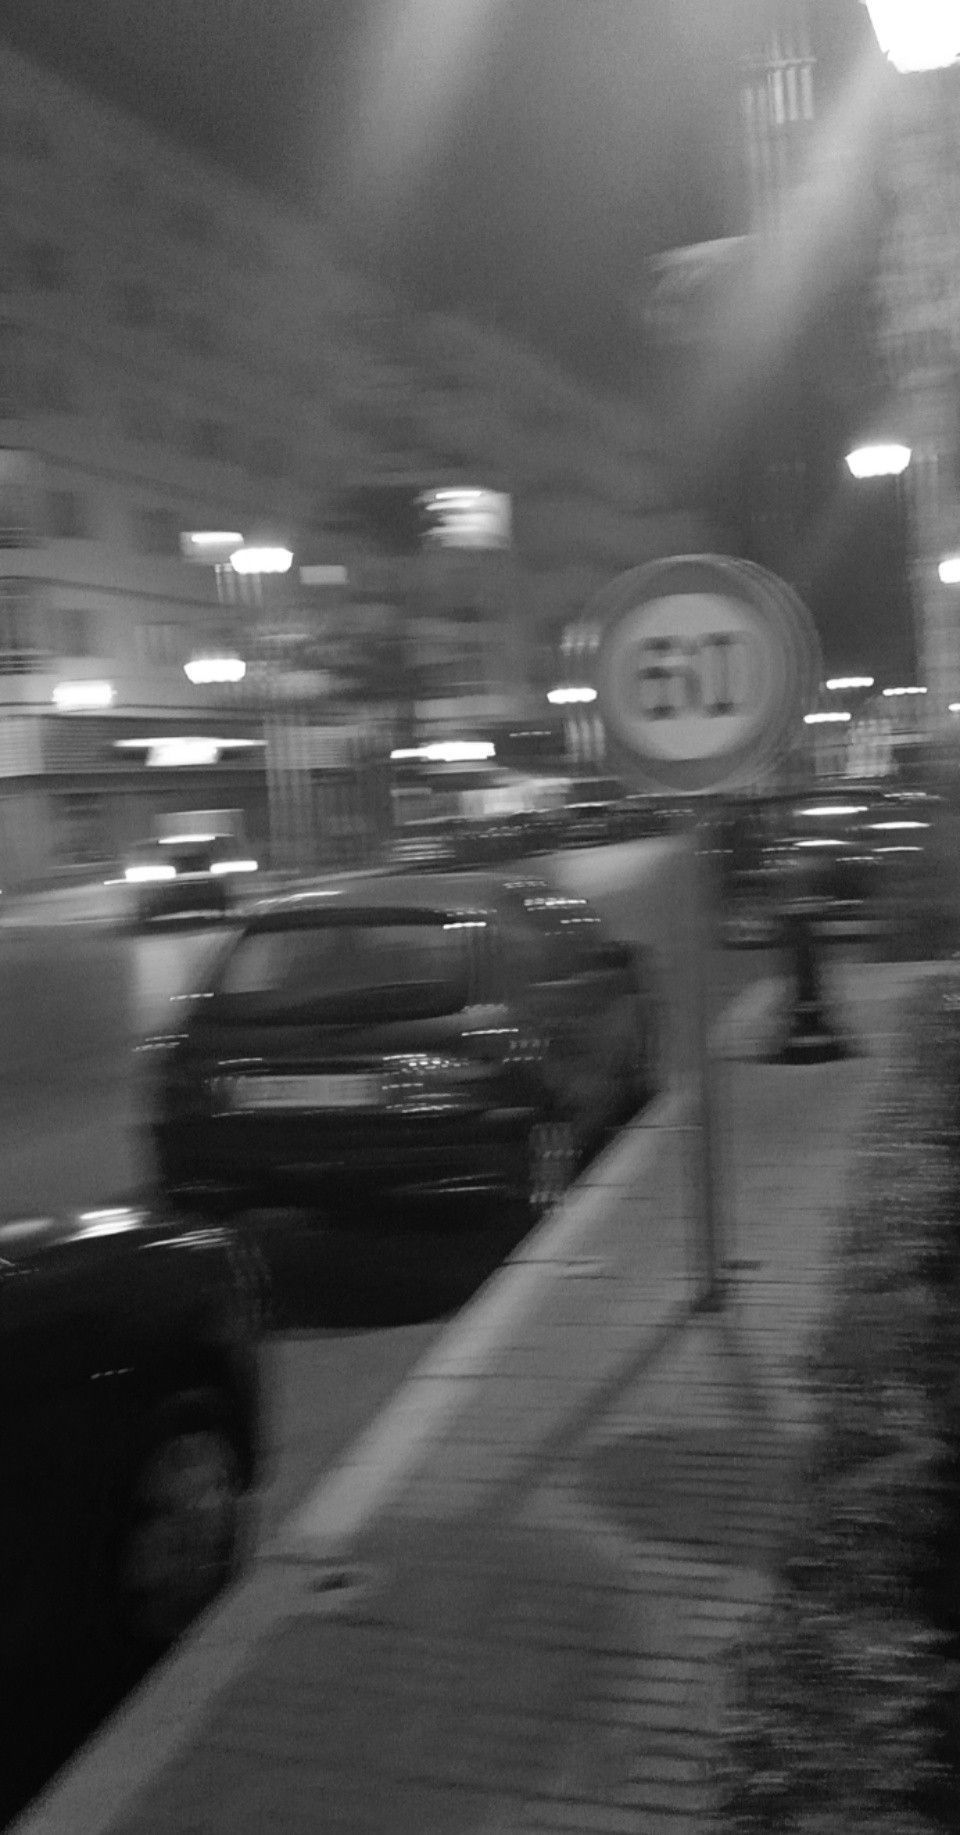 A blurry photo of cars on the street - Blurry